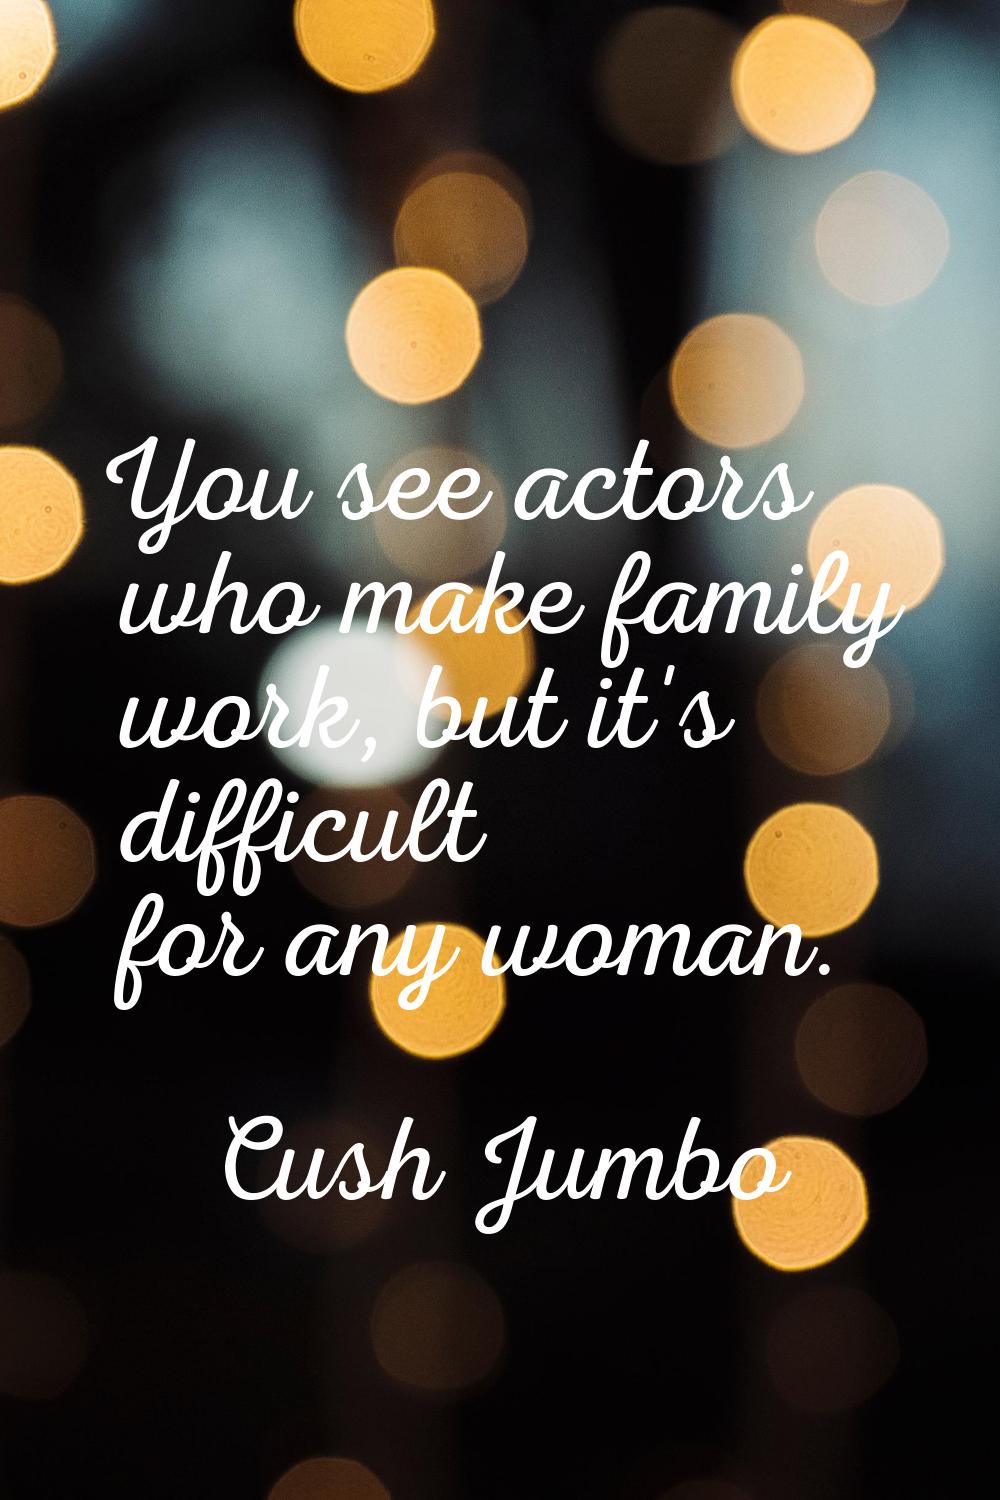 You see actors who make family work, but it's difficult for any woman.